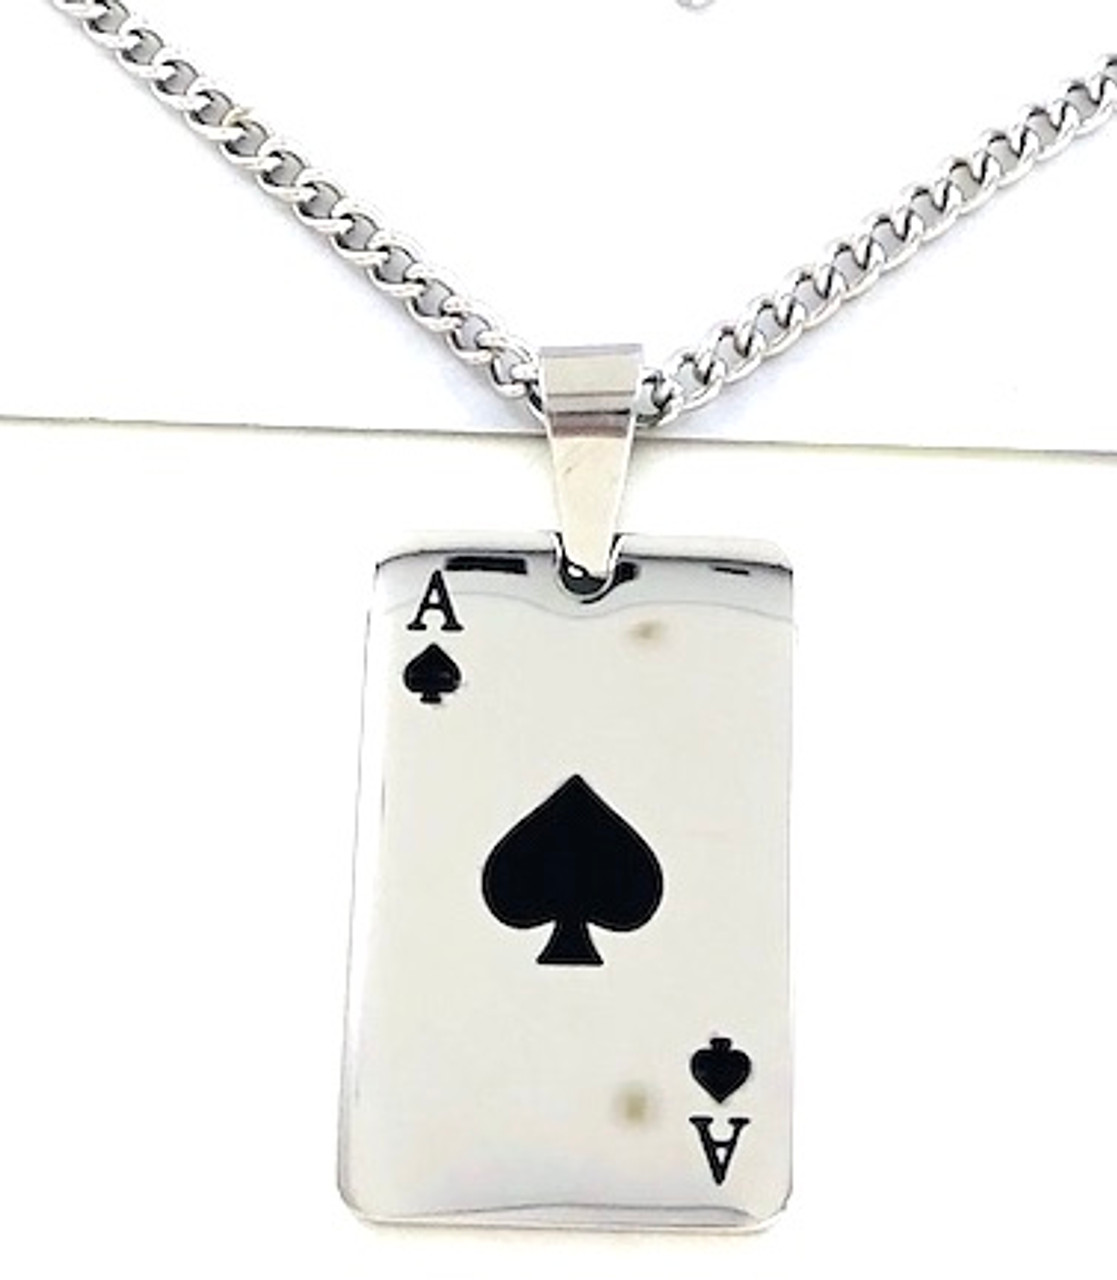 Buy Ace Pendant Necklace for Men, Ace Playing Card Necklace, Ace Poker Card  Necklace with Chain, Ace Of Spades Pendant, Stainless Steel Chain, Gambling  Casino Jewelry Gift for Men Boys, Metal, not